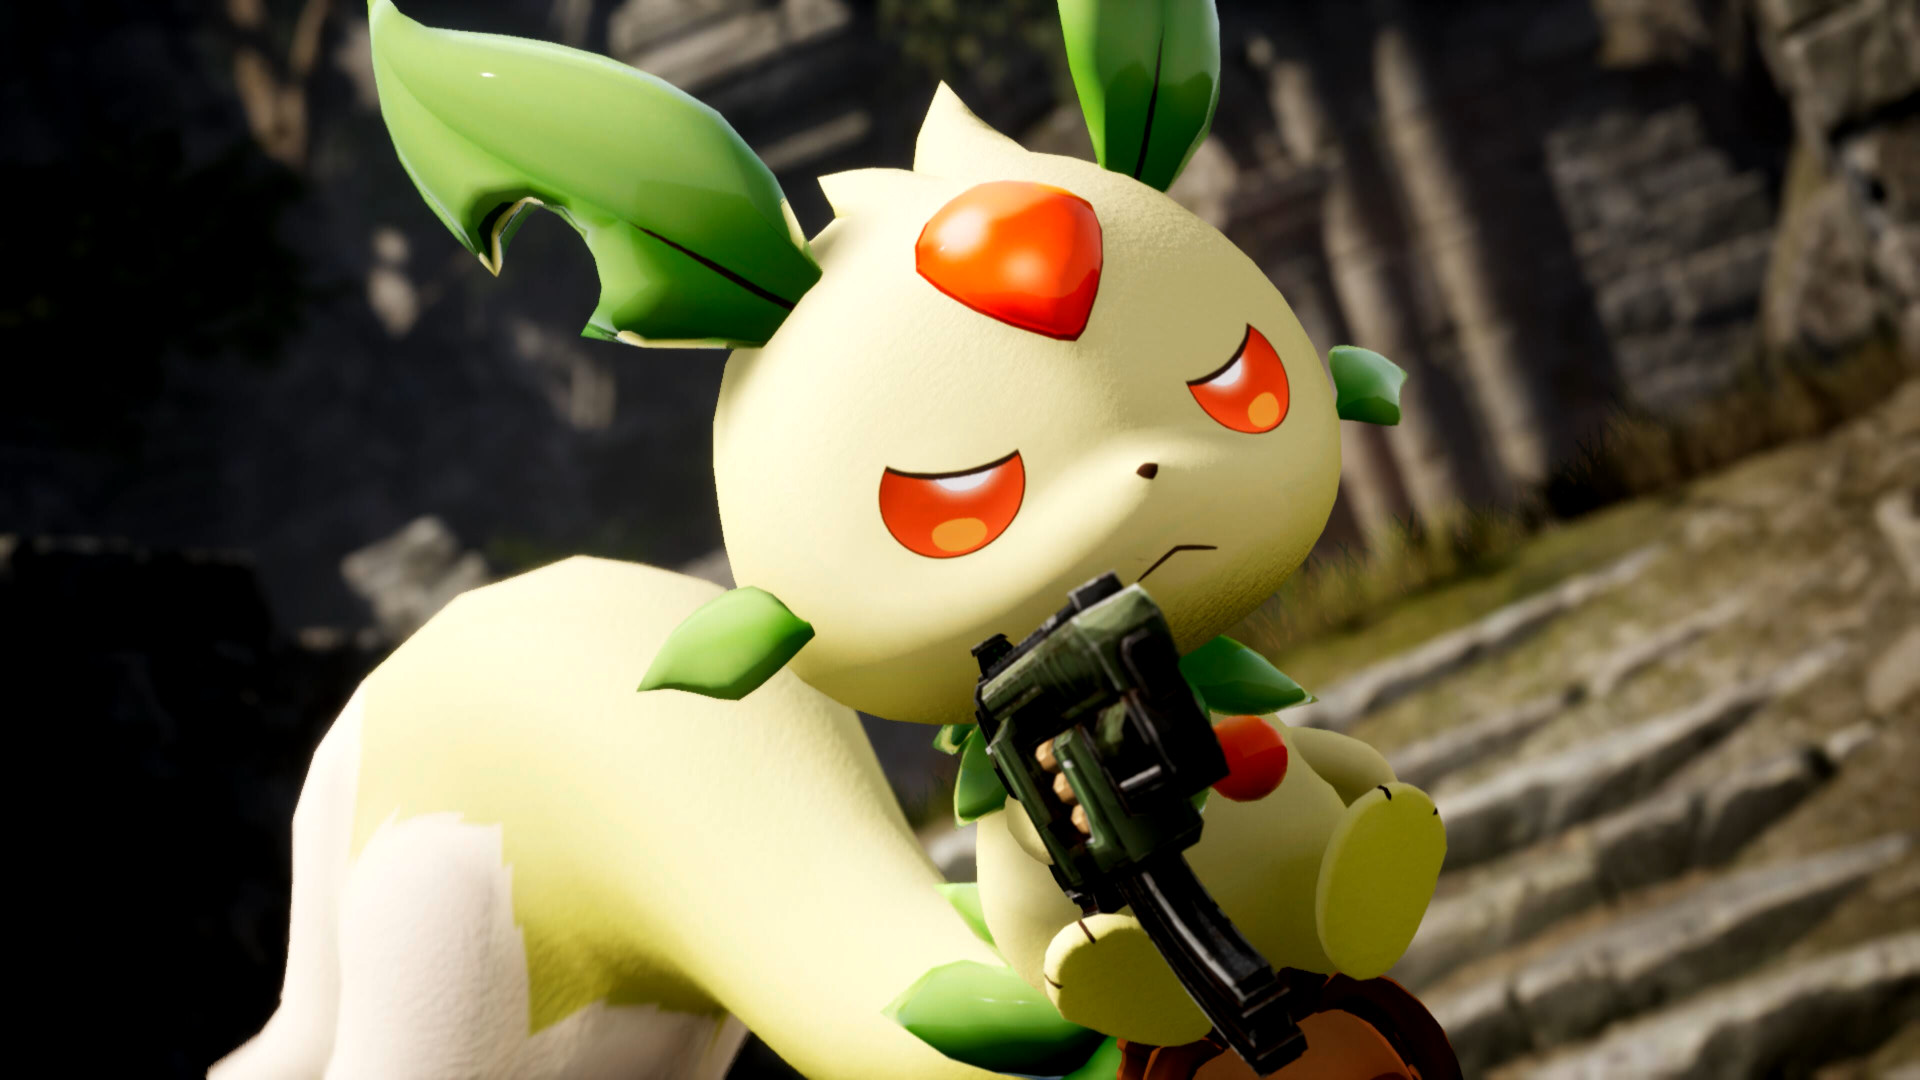 A cute, grass-type Pal from Palworld aims a small semi-automatic handgun